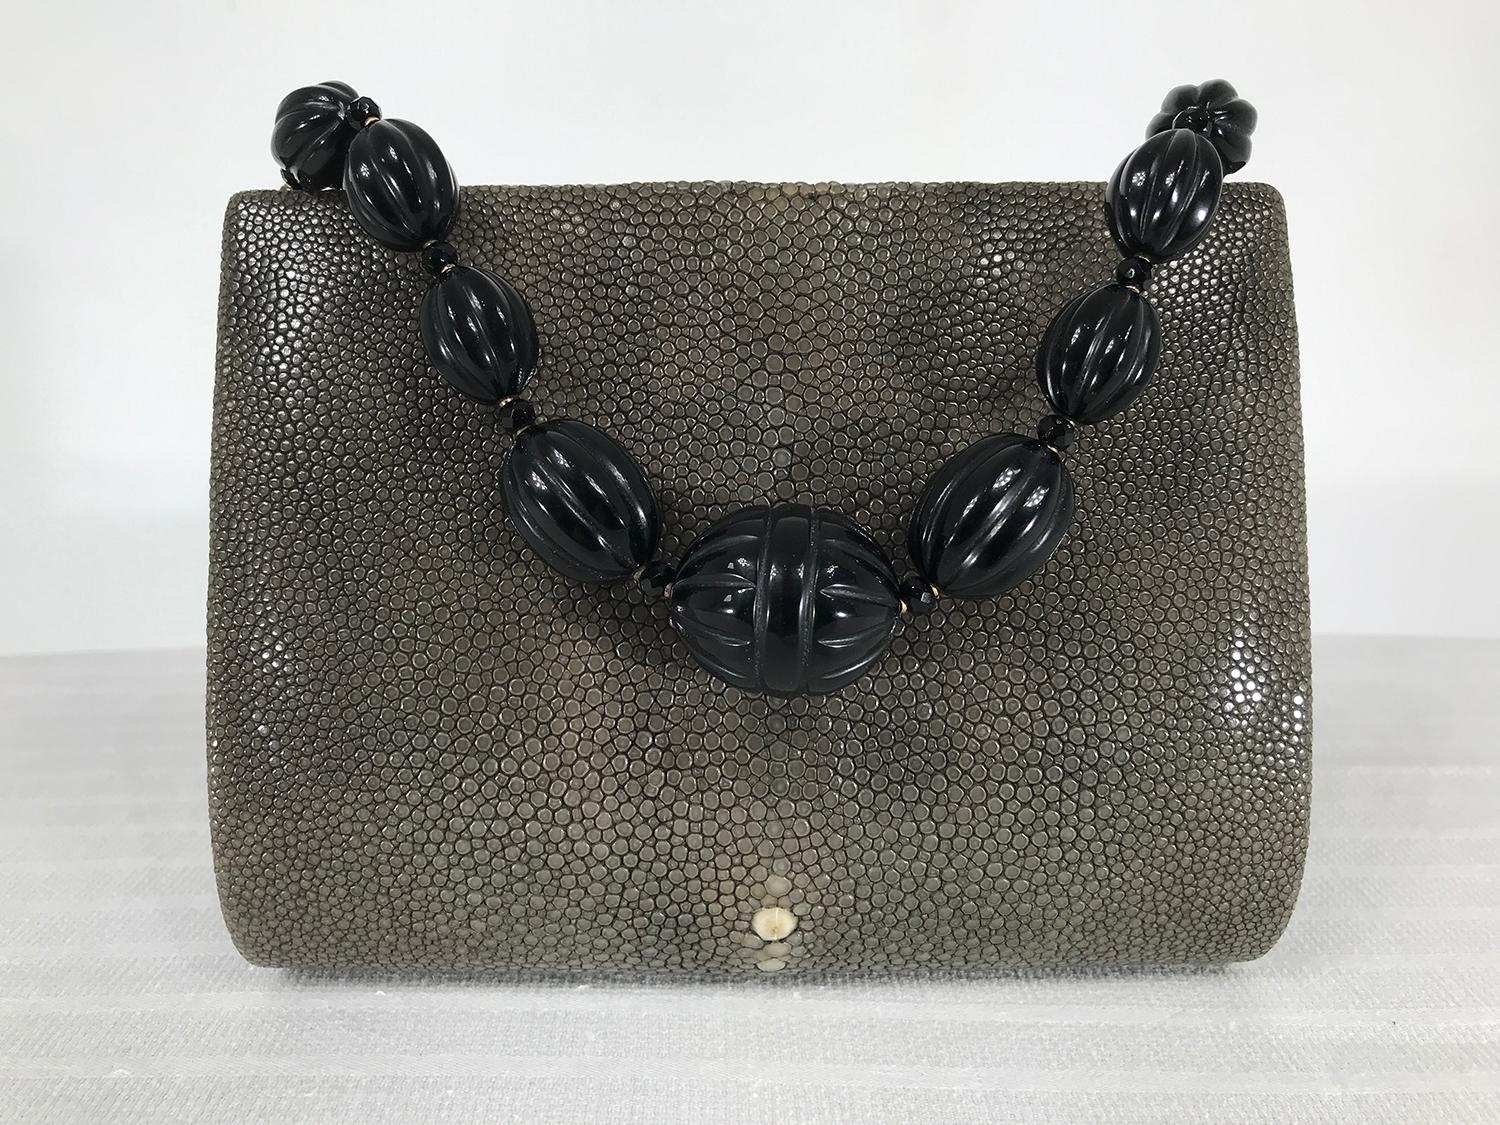 Lloyd Klein, Paris shagreen and rosewood evening bag with a carved stone beaded handle. Natural colour shagreen in greyish green, the beaded handle is black. The bag frame is rosewood and closes with a strong magnetic clasp. The bag sides are soft